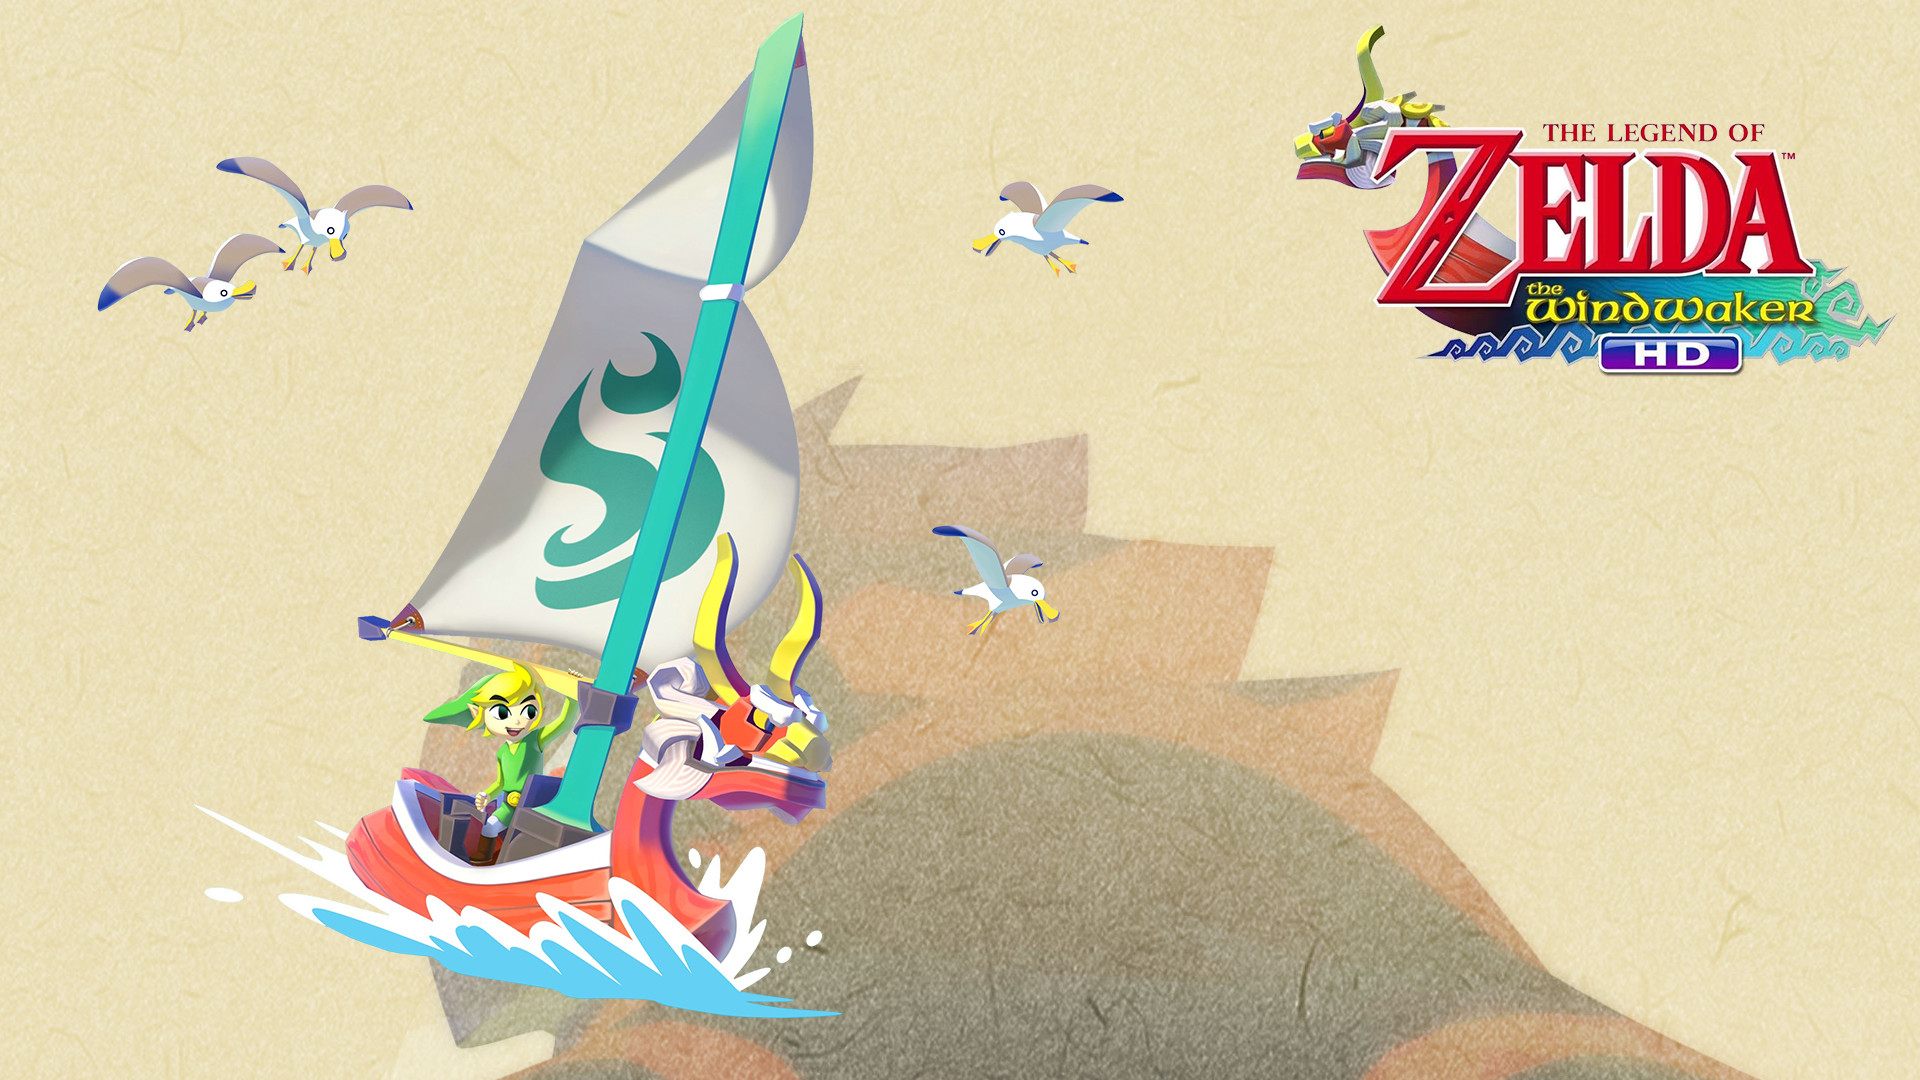 Wallpaper and newest wind waker images in 4k ultra hd